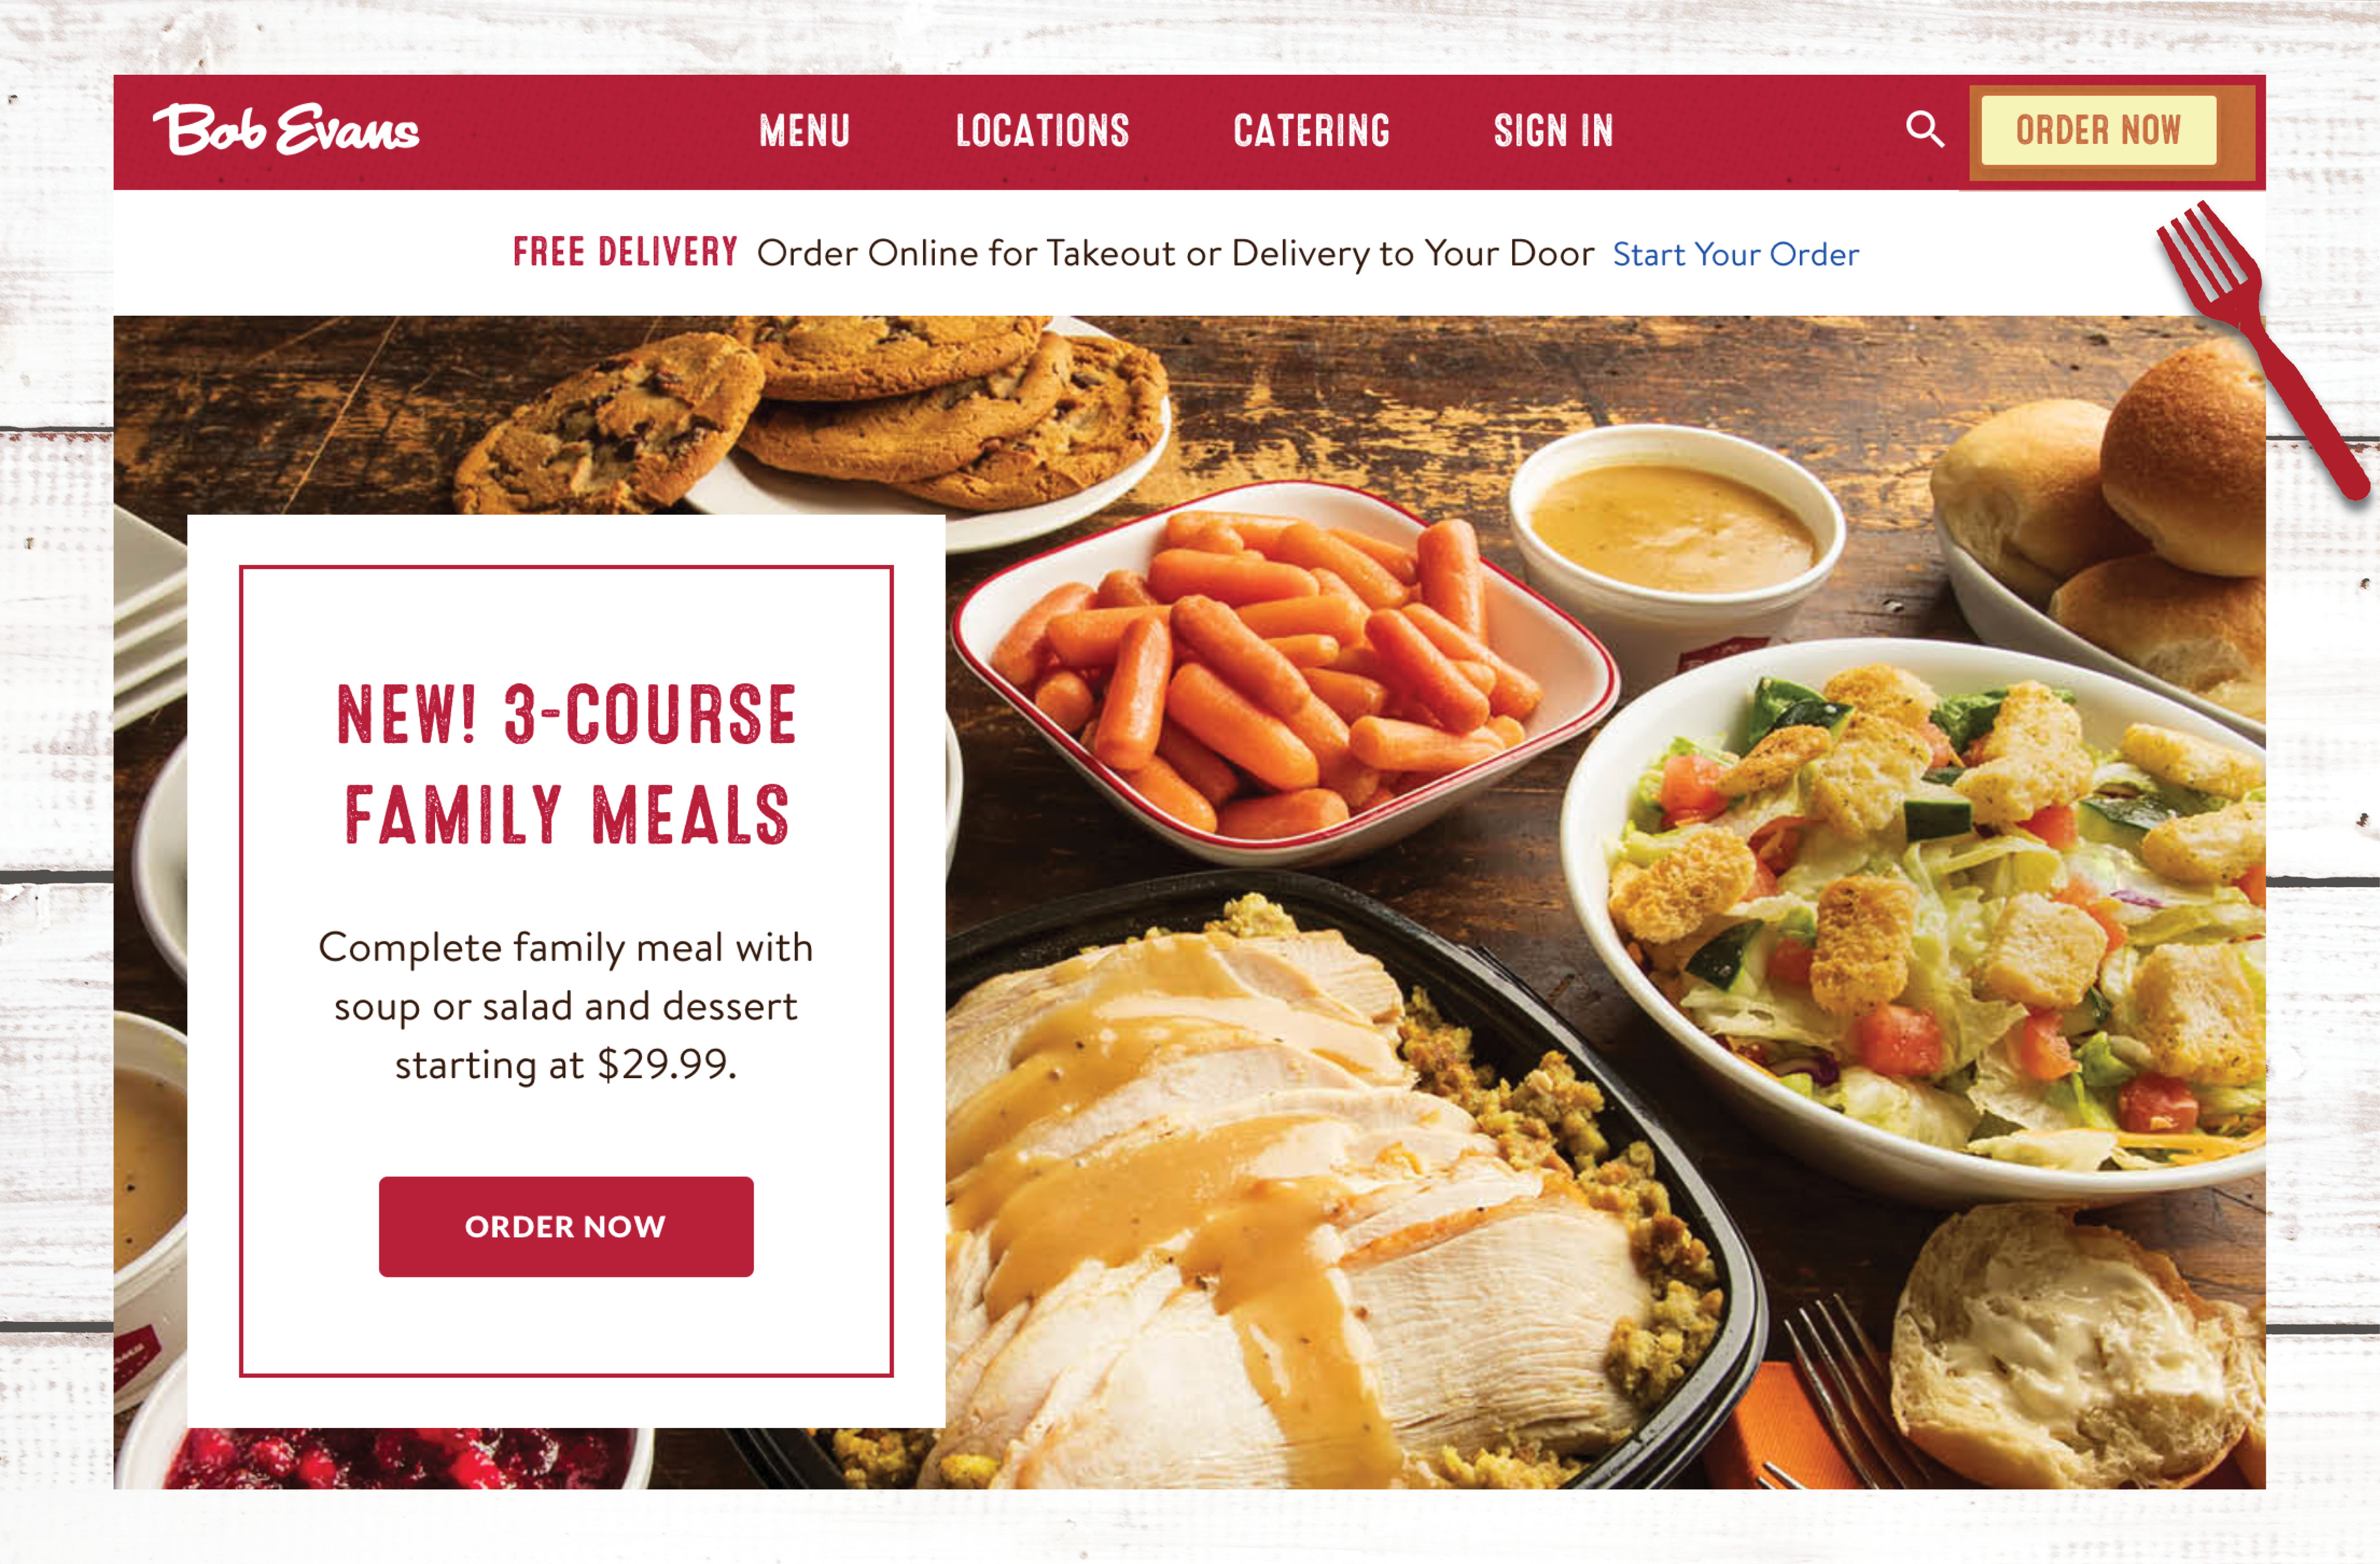 Bob Evans How To Order Curbside Pickup, Takeout Or Delivery From Bob